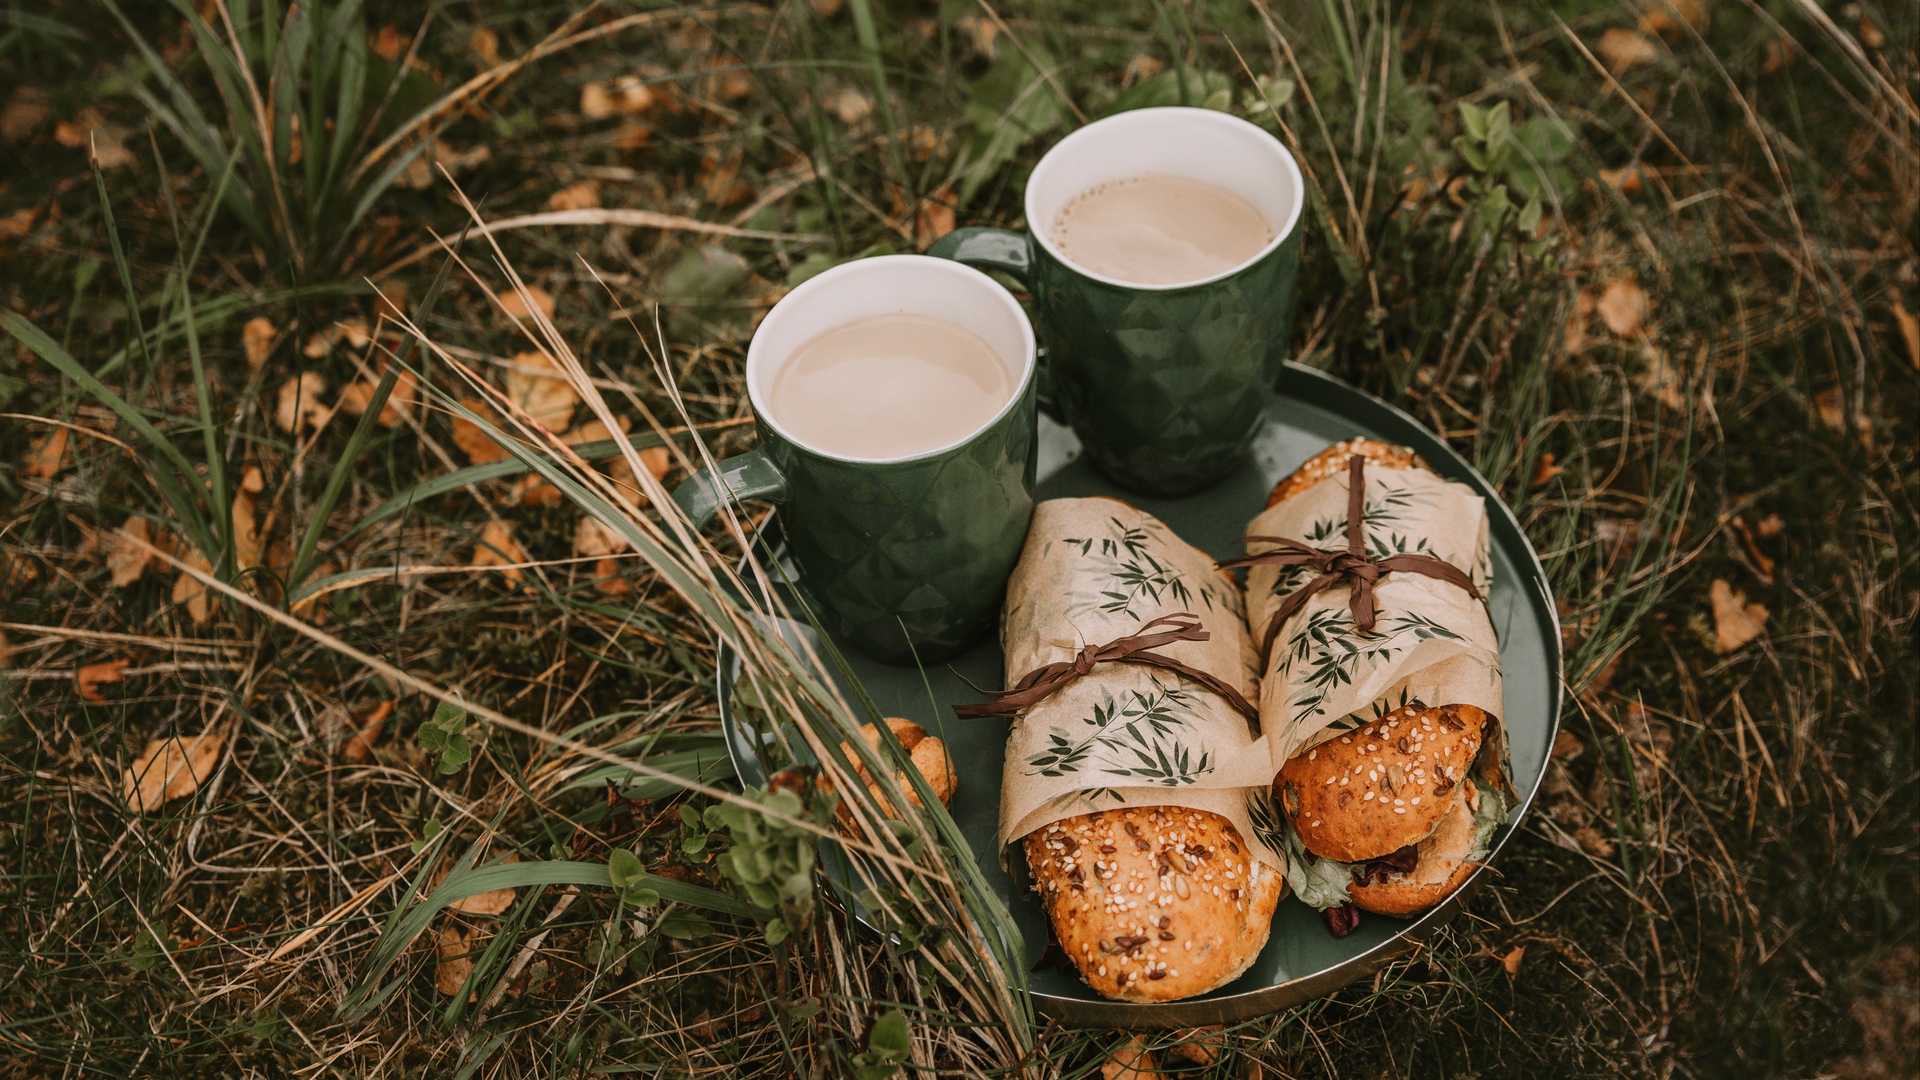 General 1920x1080 coffee sandwiches food outdoors picnic grass